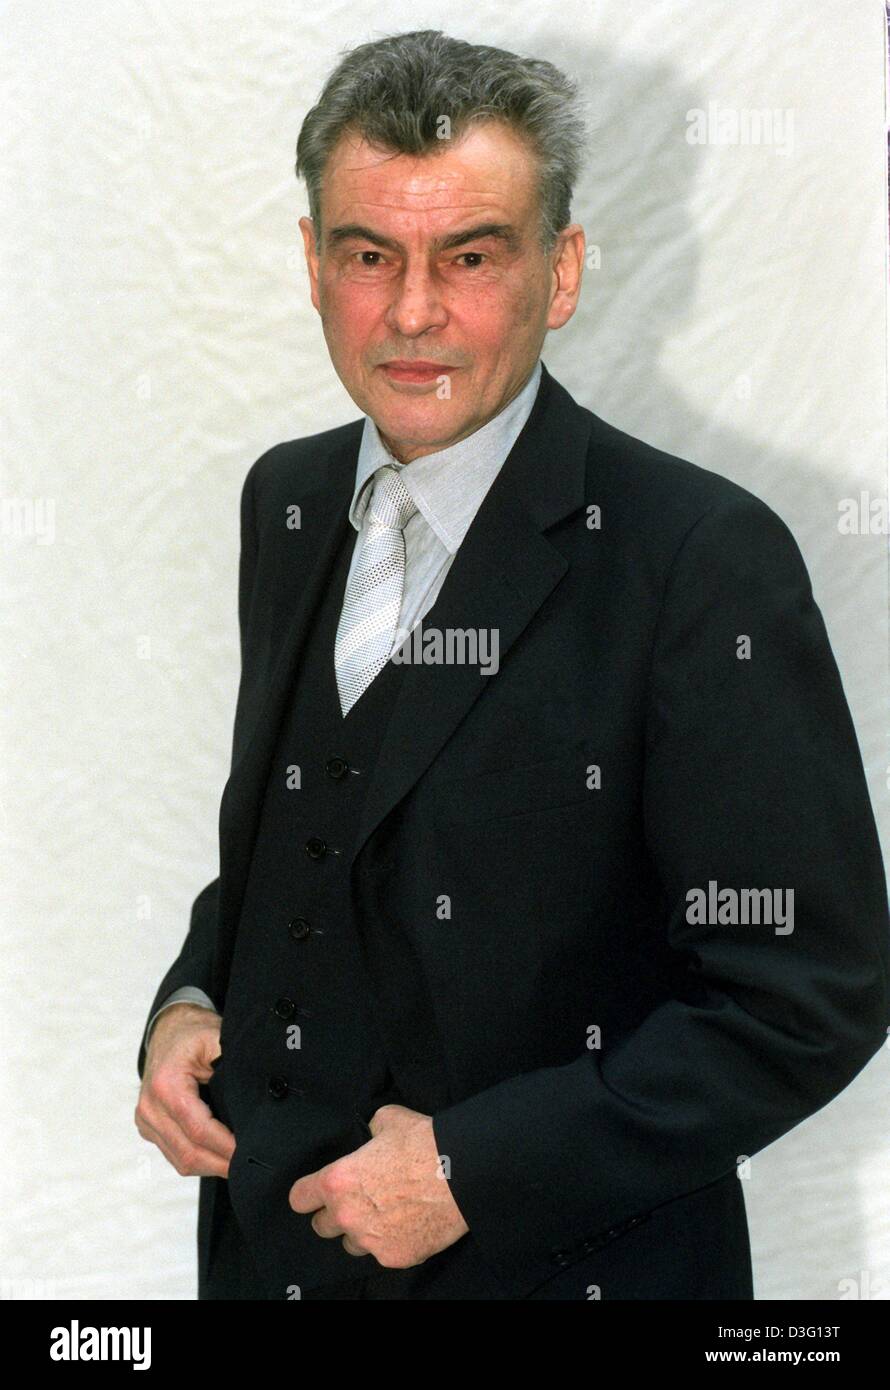 (dpa files) - German actor Horst 'Hotte' Buchholz pictured in Hamburg, 16 January 1998. The German legend died 3 March 2003 at the age of 69 in Berlin of a 'serious illness'. Buchholz was one of the few German actors to come to international fame and to succeed in Hollywood. Born on 4 December 1933 in Berlin, Buchholz debuted in 'Marianna' in 1955 and won a Cannes Film Festival awa Stock Photo